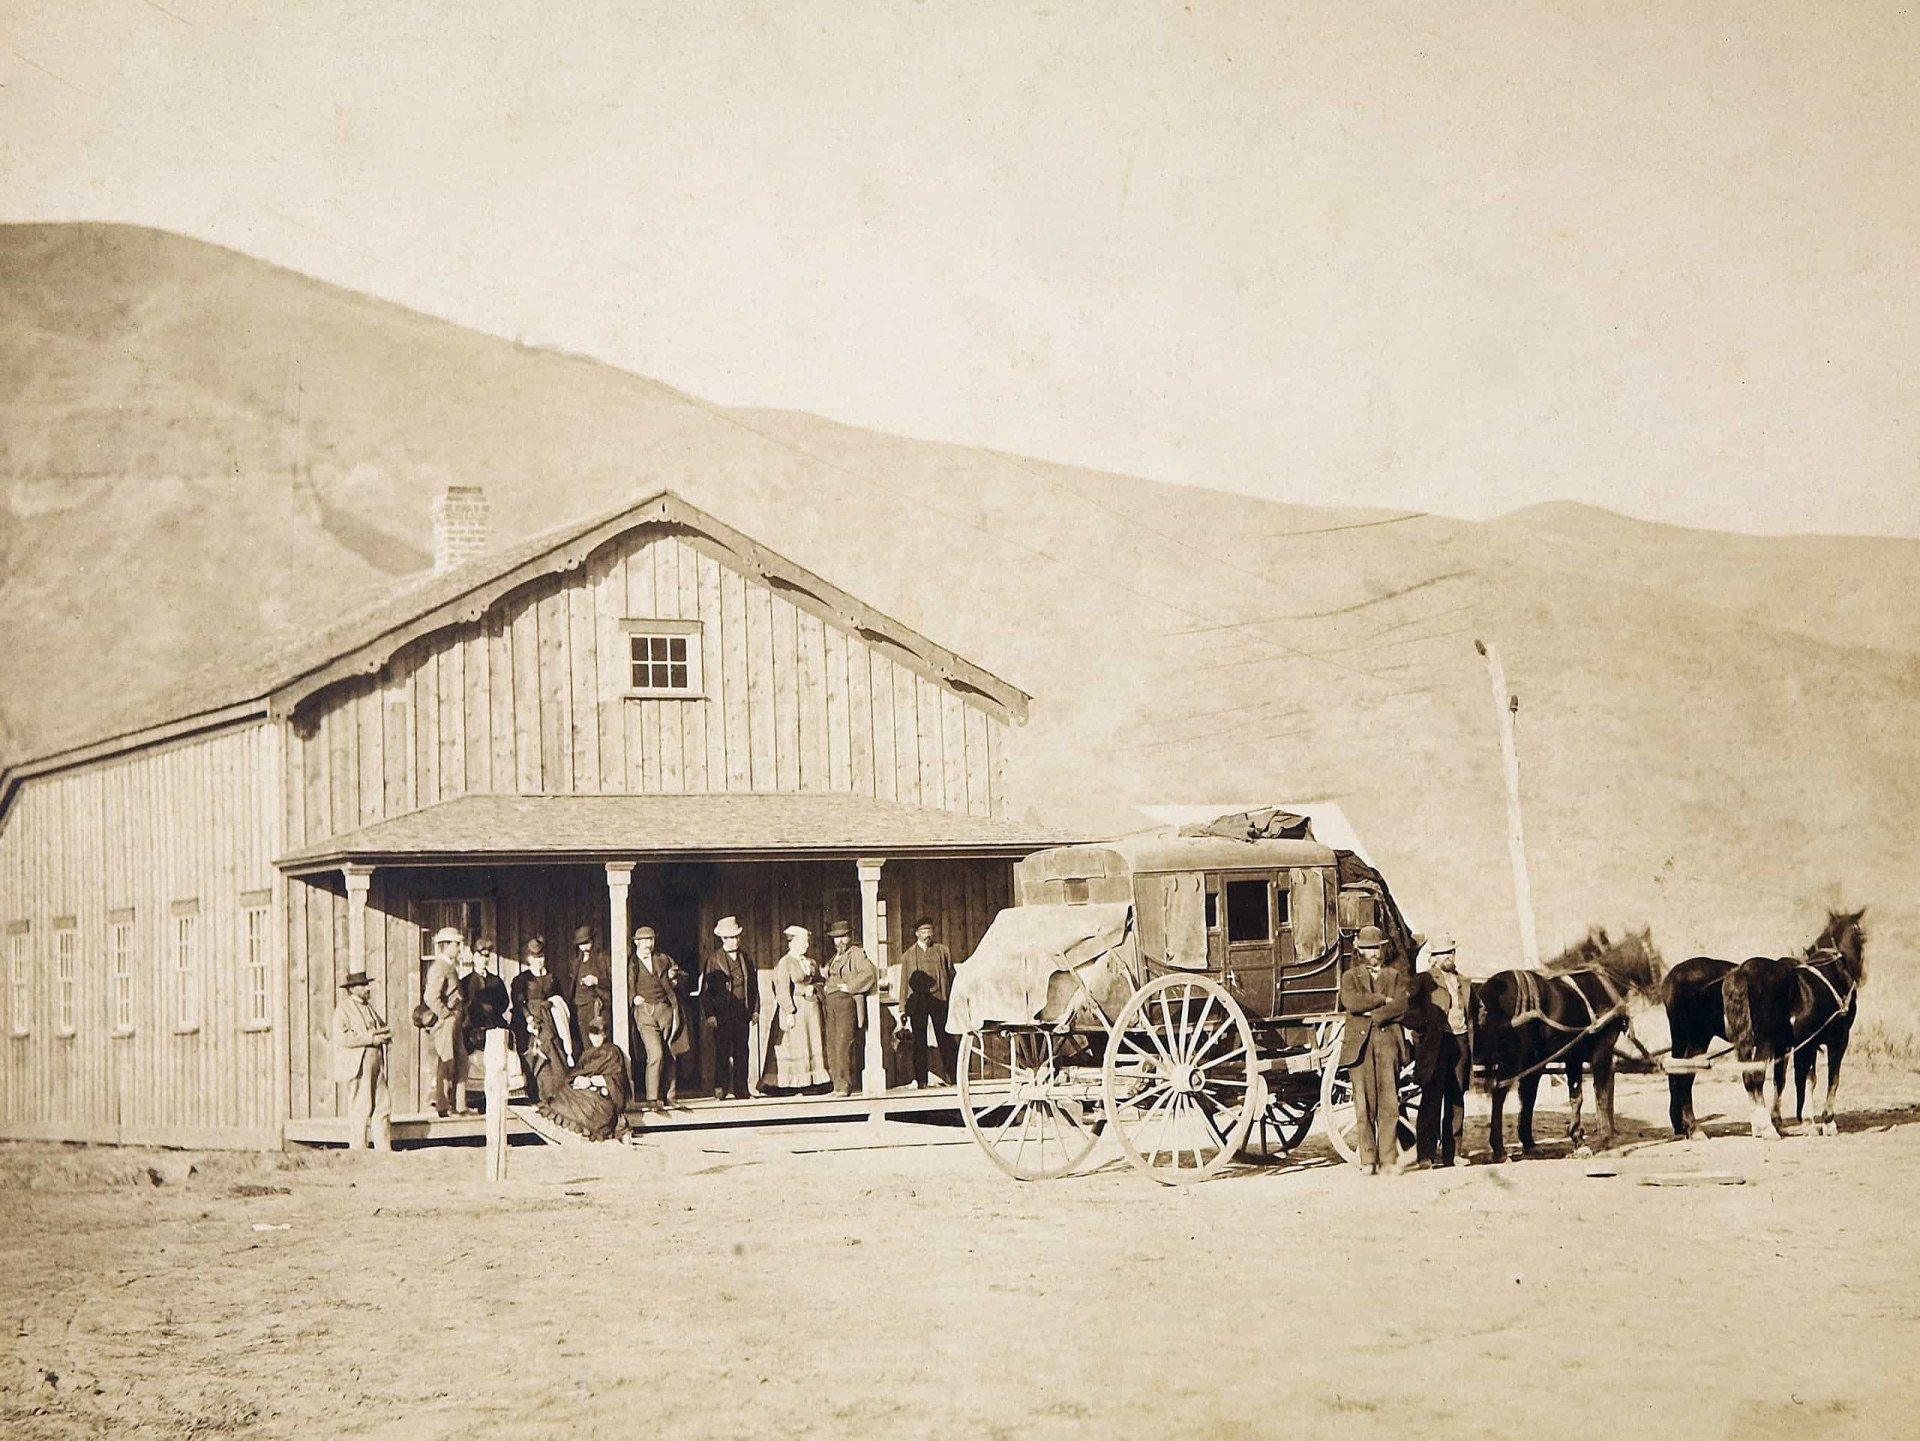 <p>The stagecoach is another carriage associated with the <a href="https://www.starsinsider.com/lifestyle/433454/most-wanted-notorious-outlaws-of-the-old-west" rel="noopener">Old West</a>. Drawn by four horses, stagecoaches were widely used before steam-powered rail transport was available. They were named for the stops made by drivers at stage stations where horses would be replaced by fresh steeds. Pictured is the Echo City stagecoach pausing in Utah Territory, around 1869.</p><p>You may also like:<a href="https://www.starsinsider.com/n/291814?utm_source=msn.com&utm_medium=display&utm_campaign=referral_description&utm_content=516219v1en-us"> Social situations that introverts dread</a></p>